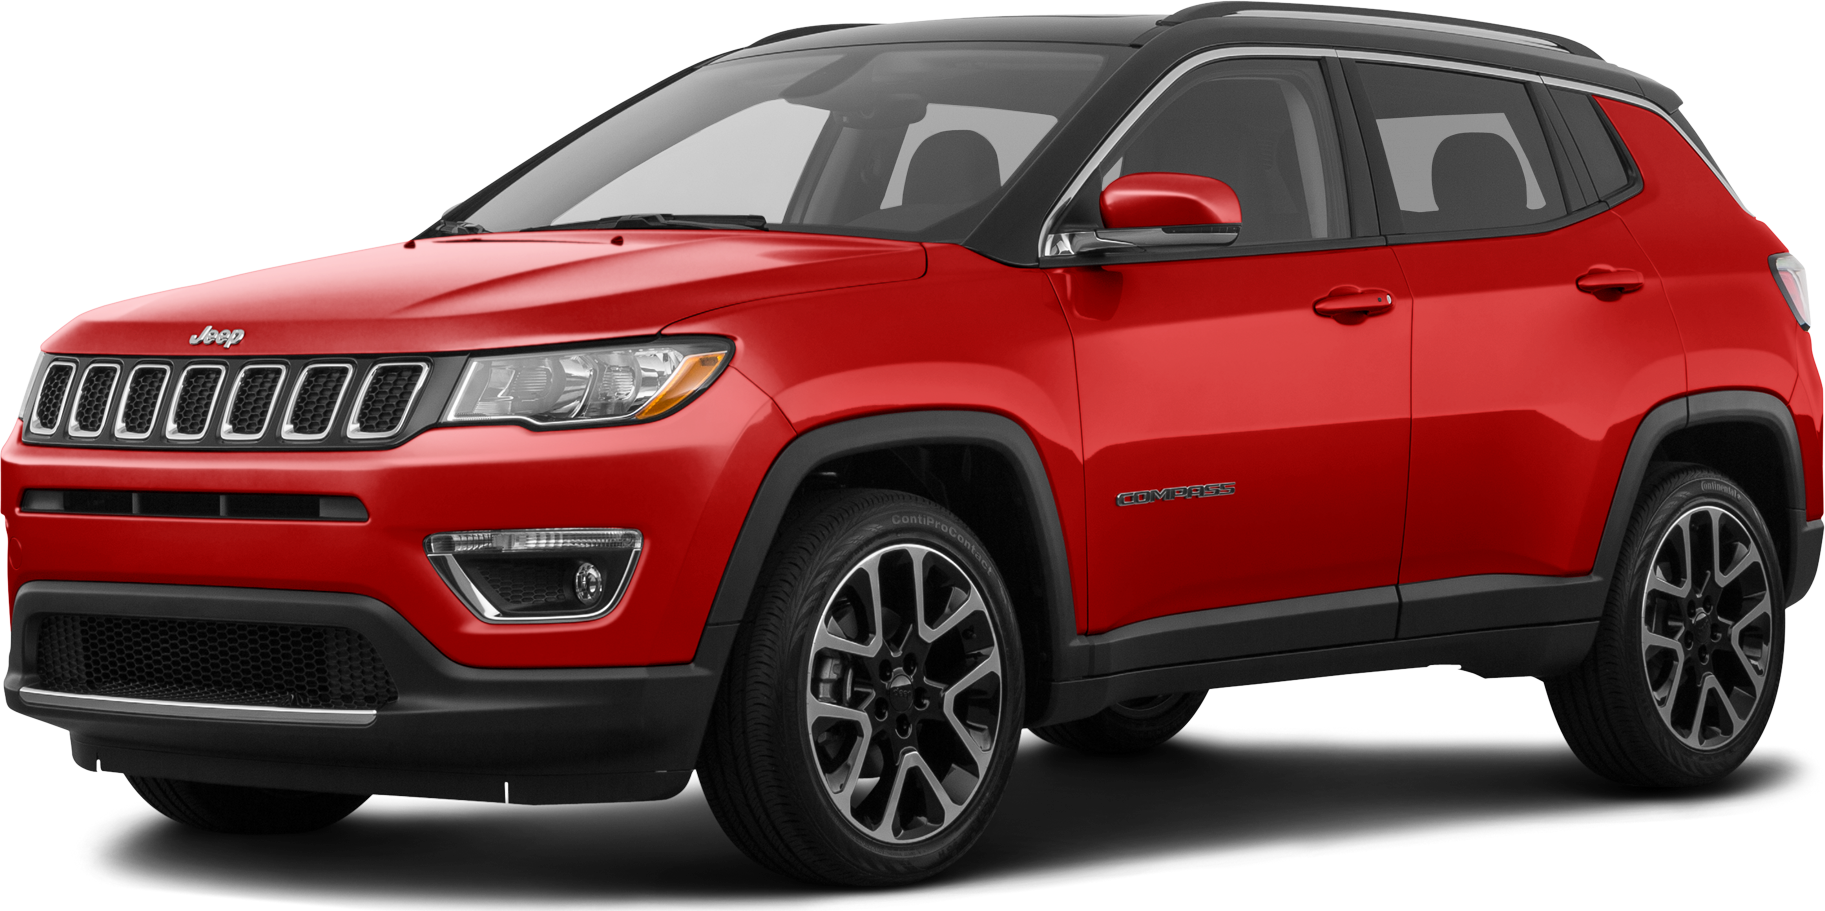 2018 Jeep Compass Price, Value, Ratings & Reviews